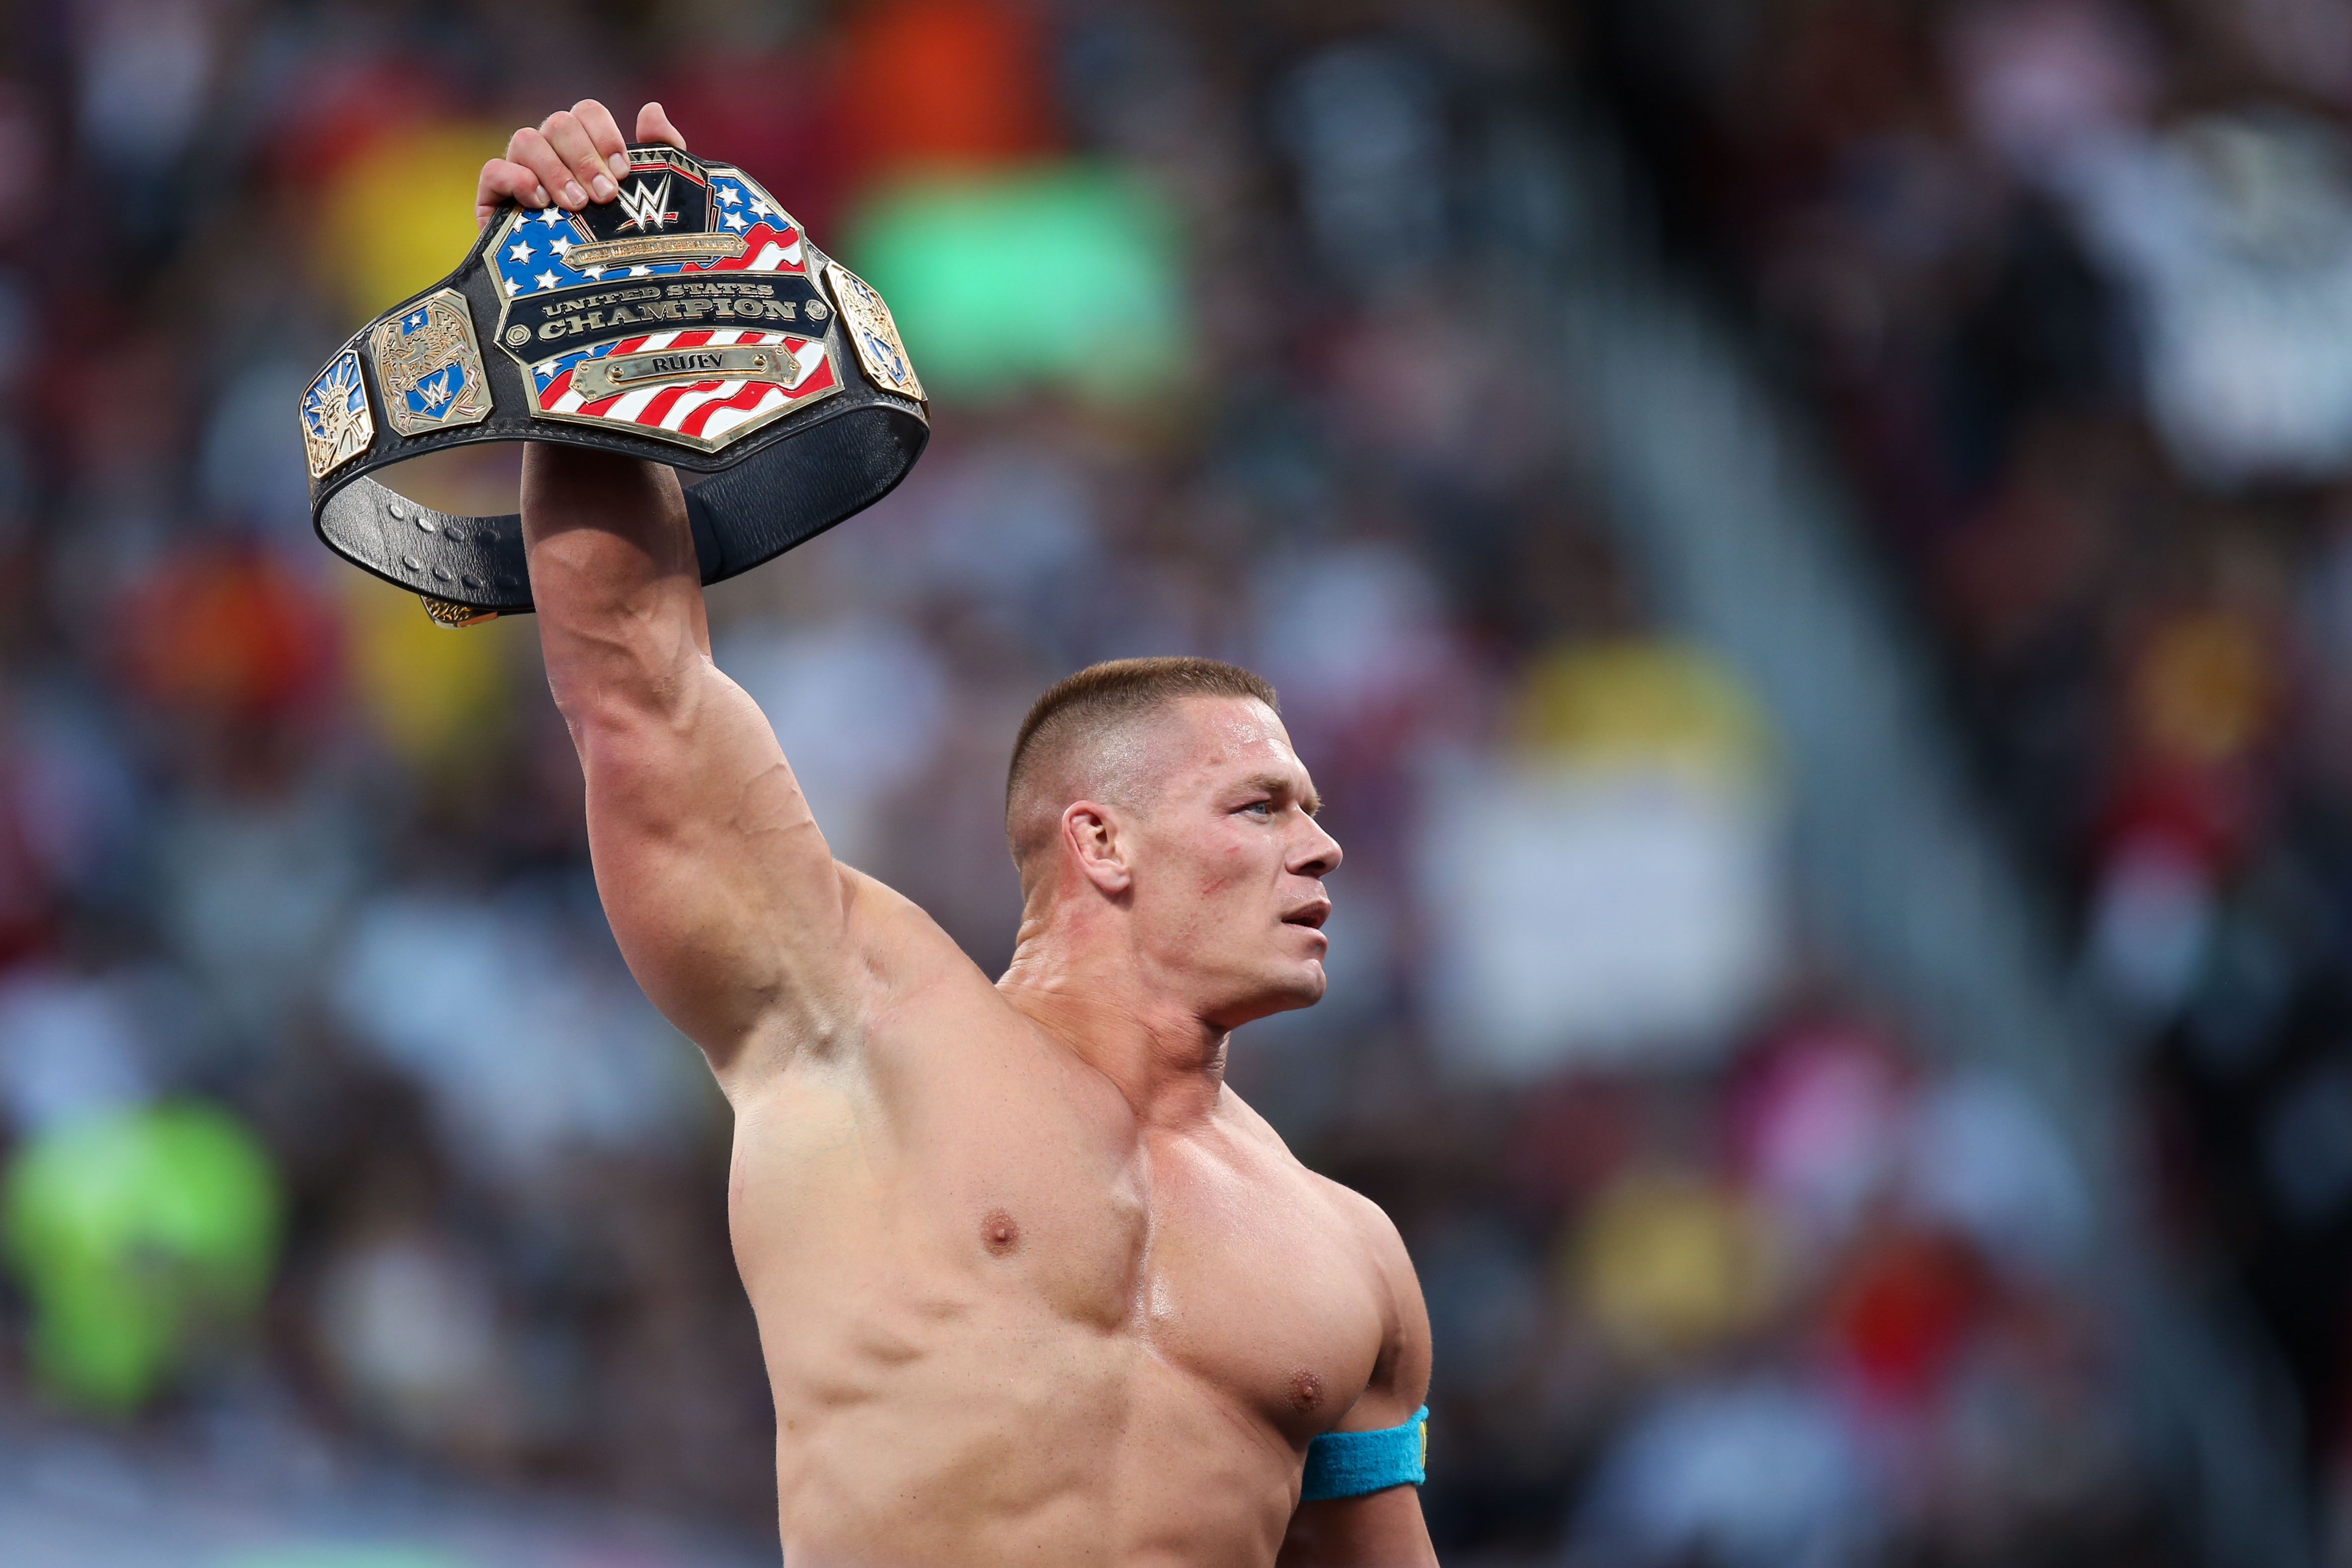 John Cena Injury Updates on WWE Superstar's Recovery from Shoulder